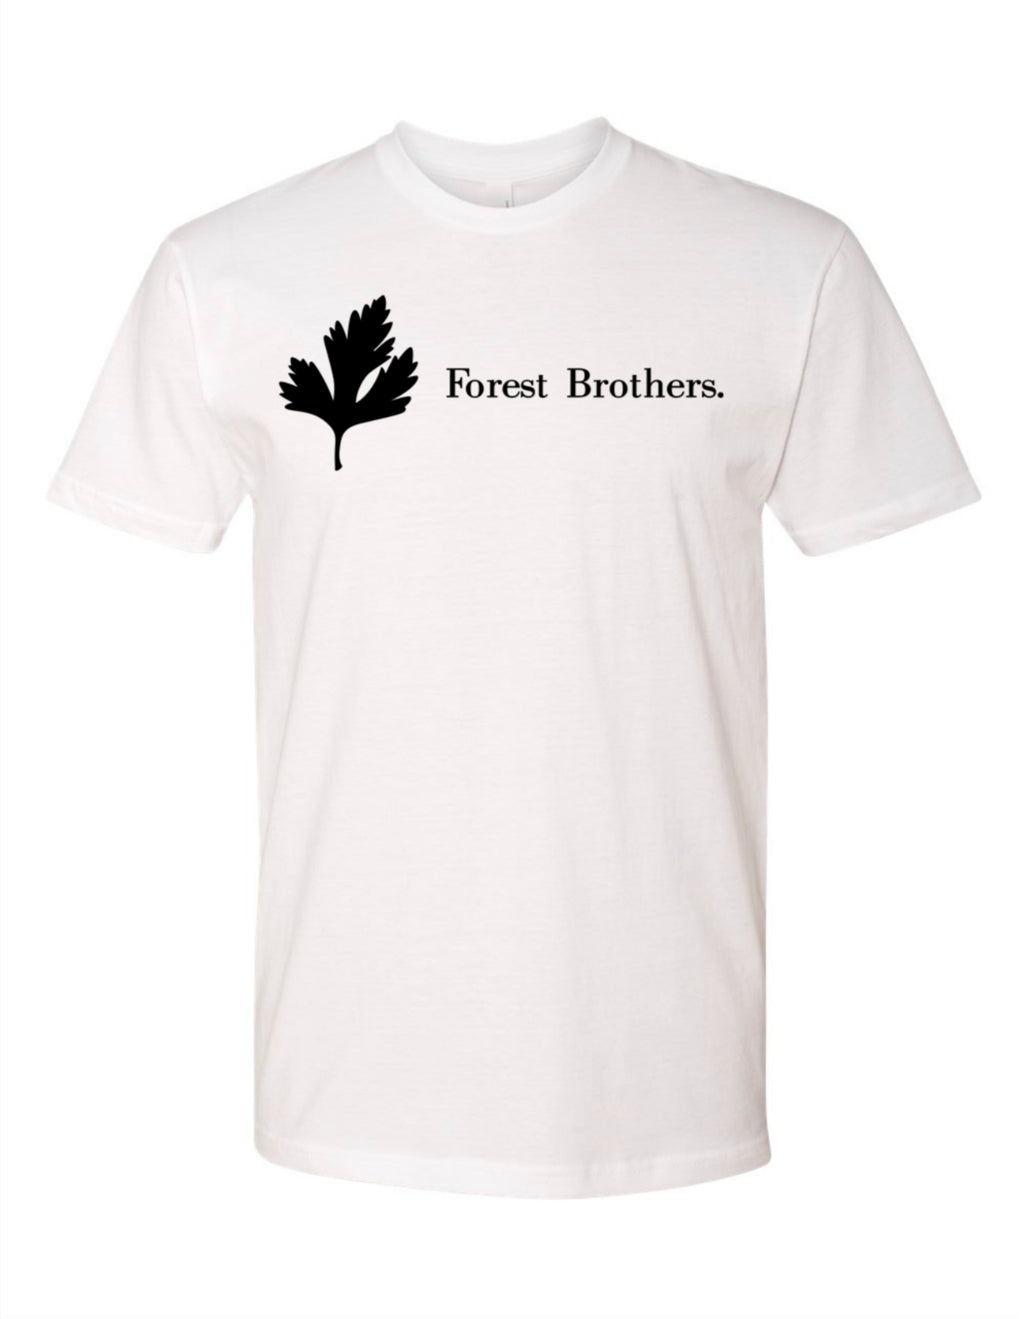 BLACK(WHITE) FOREST BROTHERS T-SHIRT